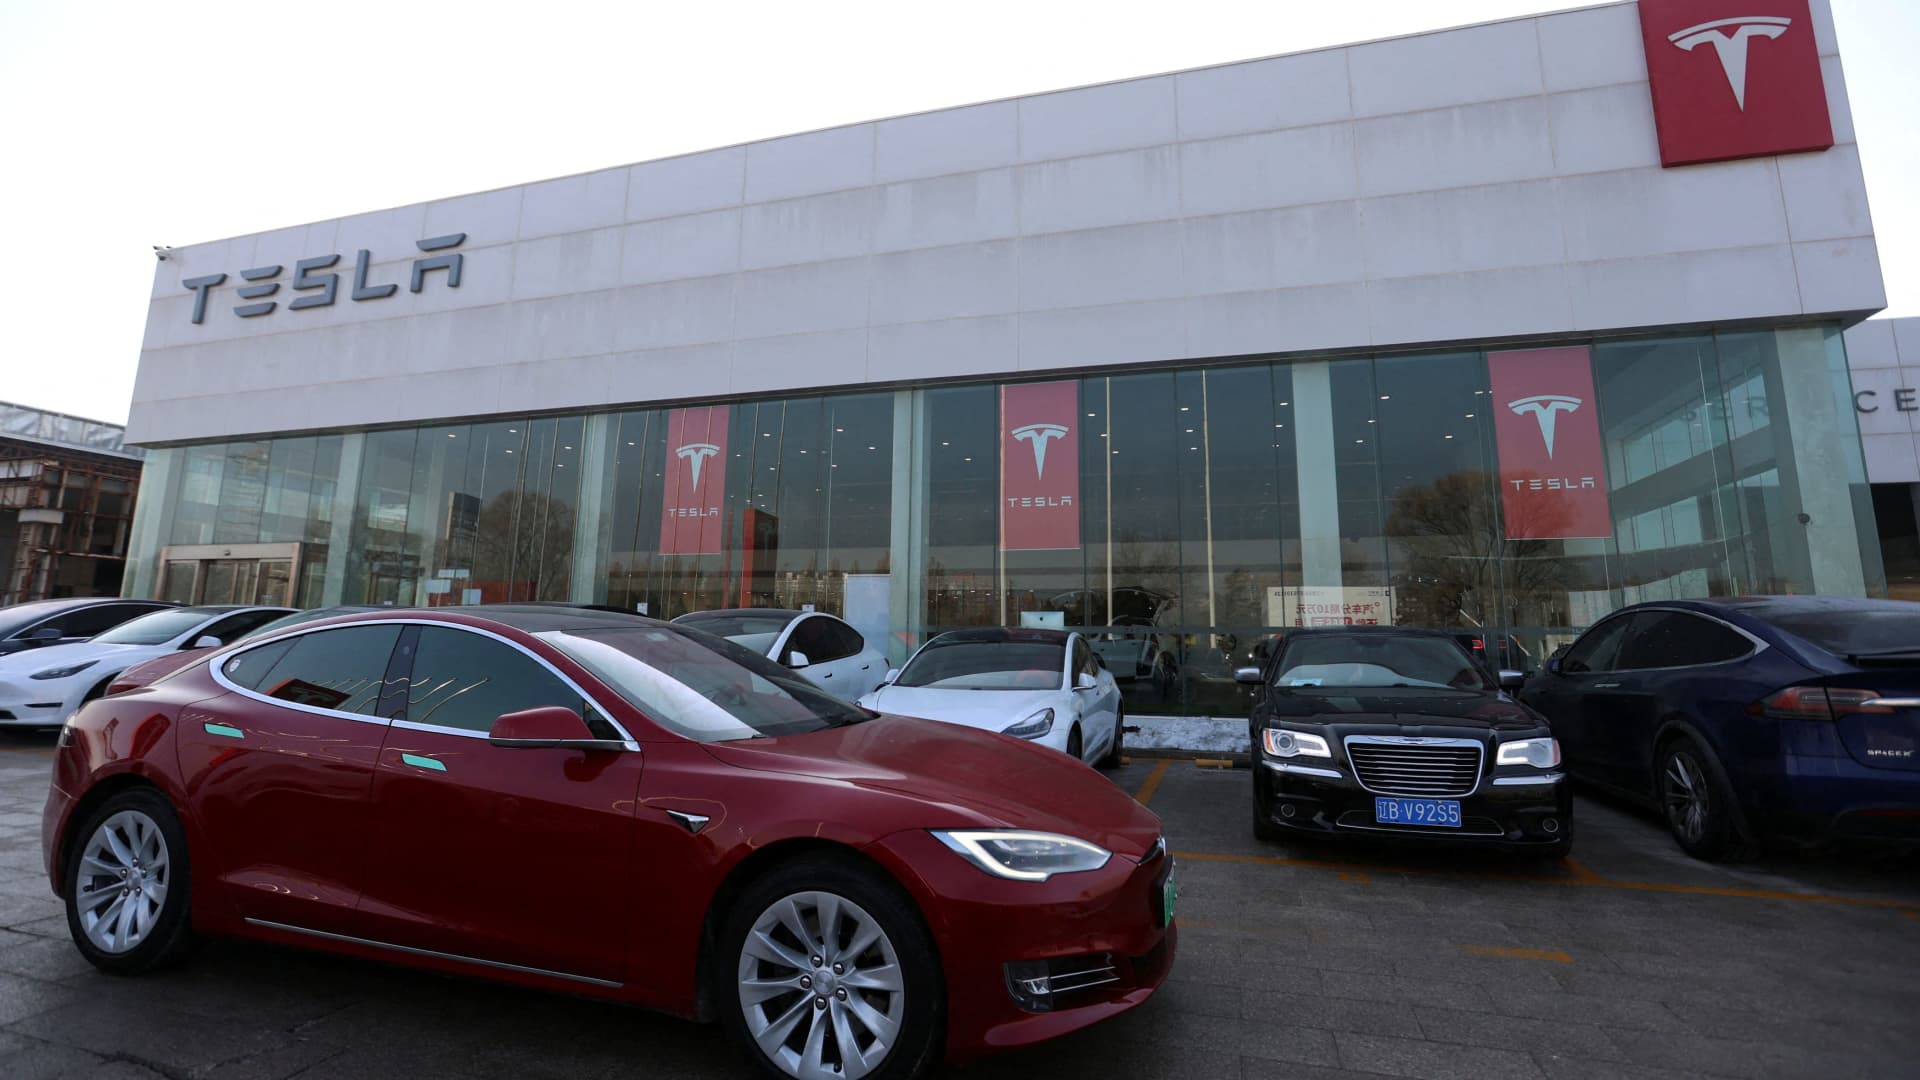 Tesla’s awful quarter has Wall Street on edge ahead of delivery numbers